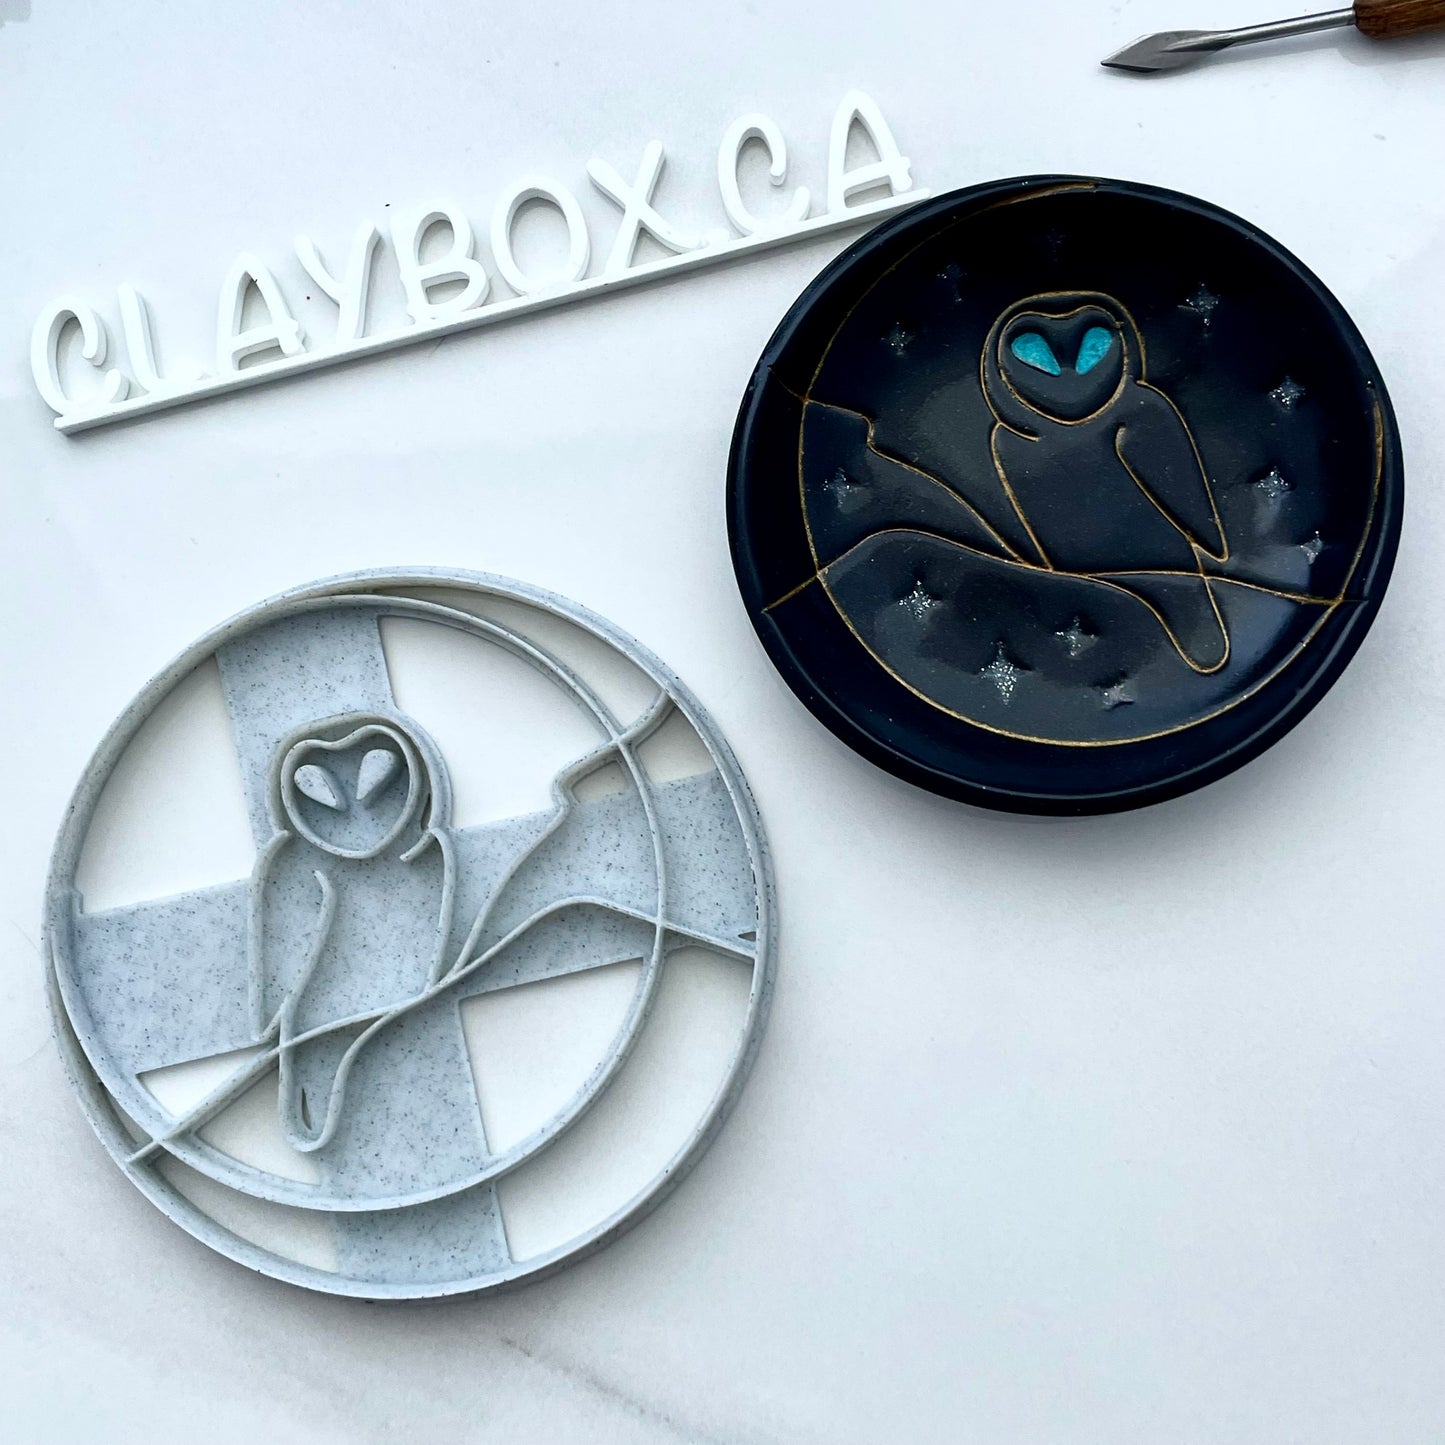 Owl and moon large cutter - perfect for making ring dishes or coasters